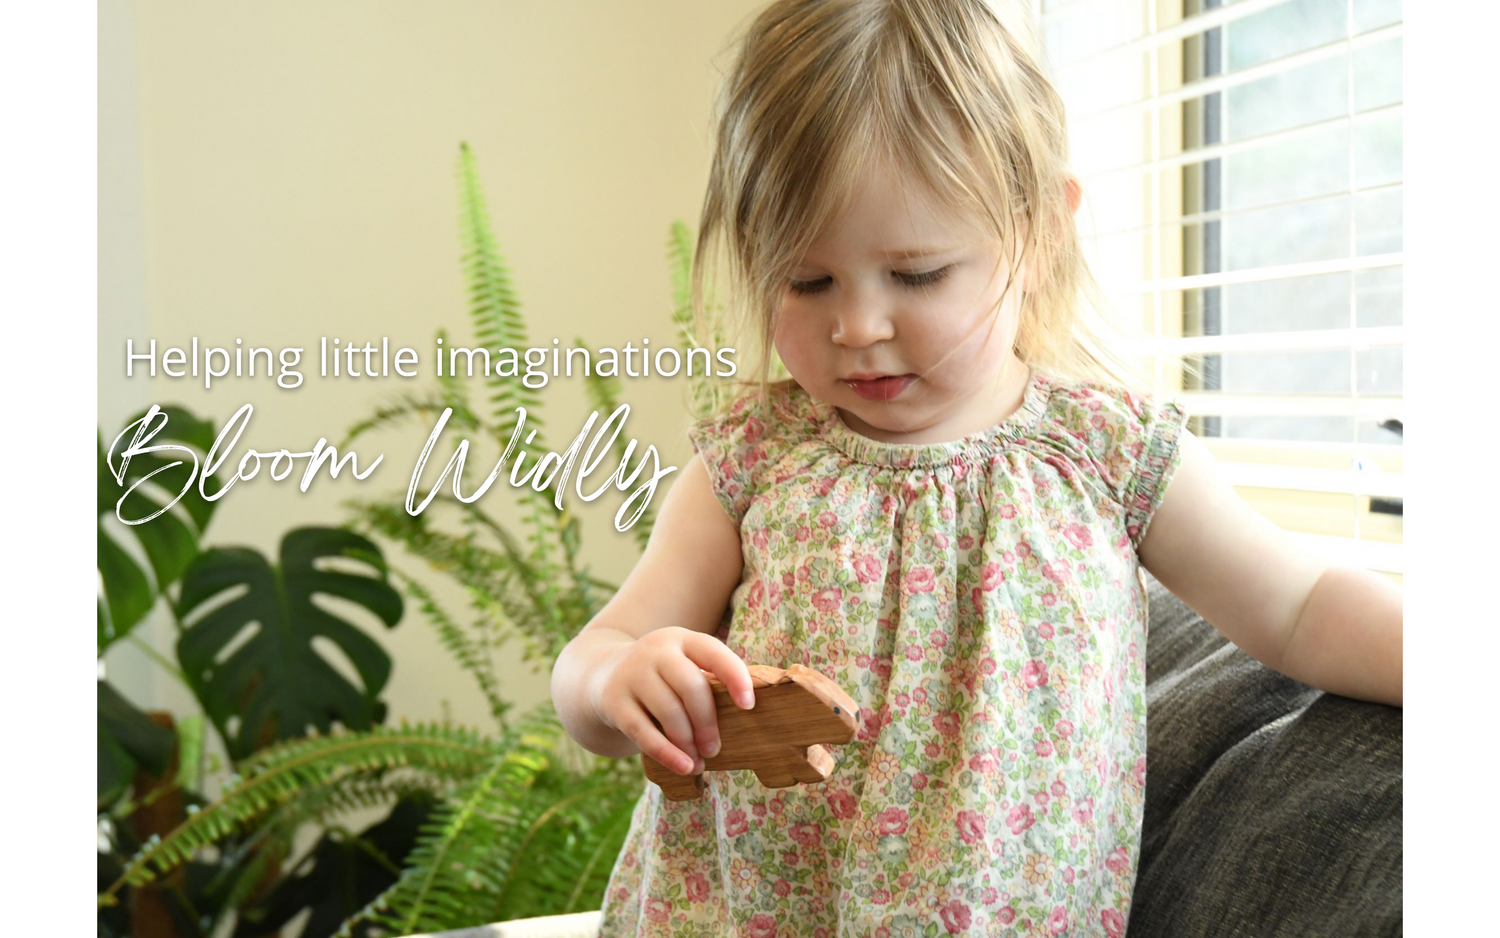 Toddler holding wooden wombat toy handcrafted in Australia from Tasmanian oak with natural oil sealer. The text reads Helping little imaginations bloom wildly.